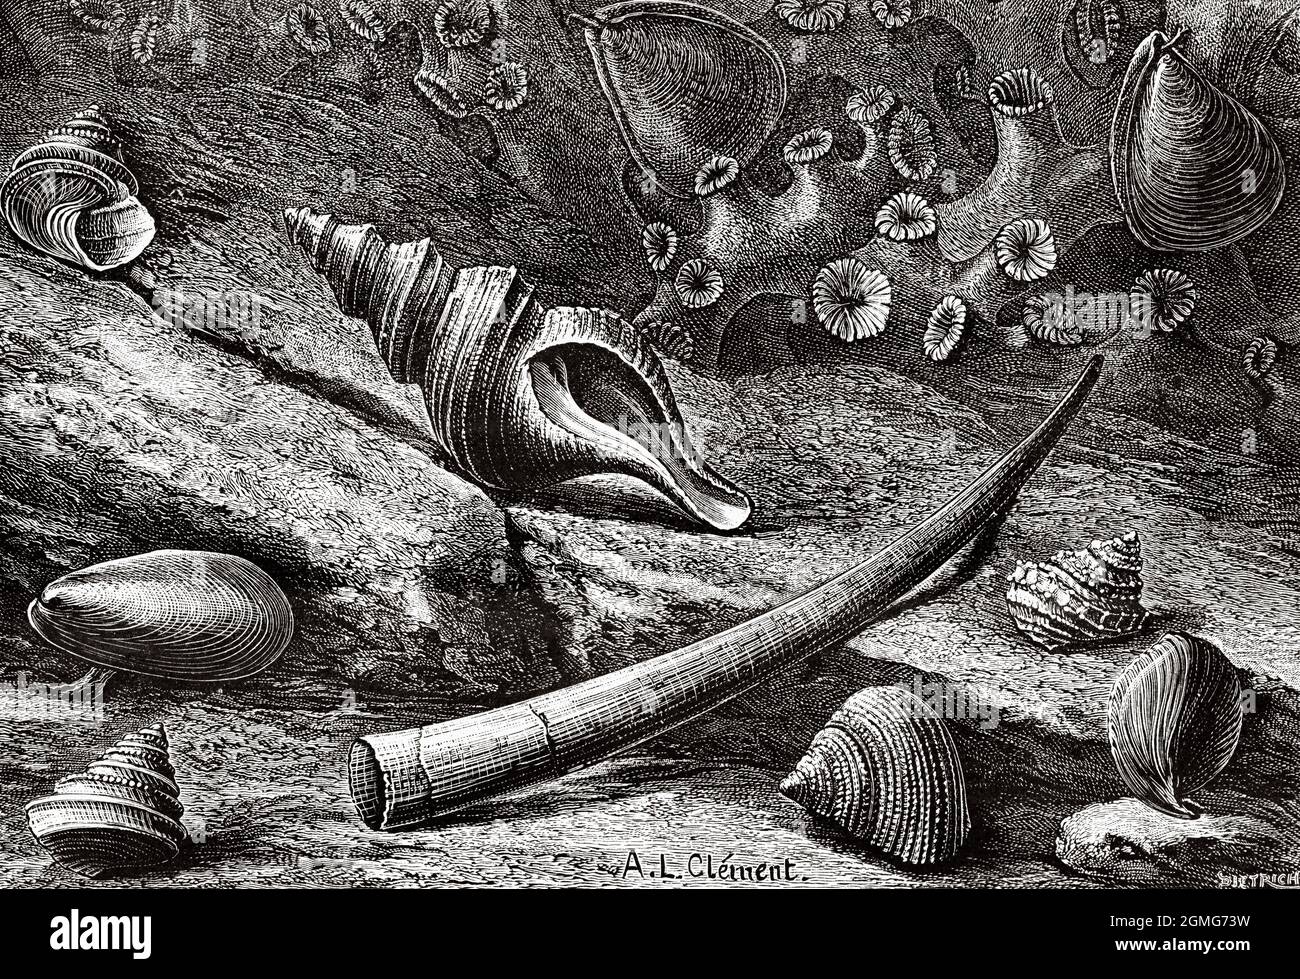 The Talisman ship scientific expedition. Some of the mollusc species living between 1500 and 2500 meters deep. Old 19th century engraved illustration from La Nature 1883 Stock Photo